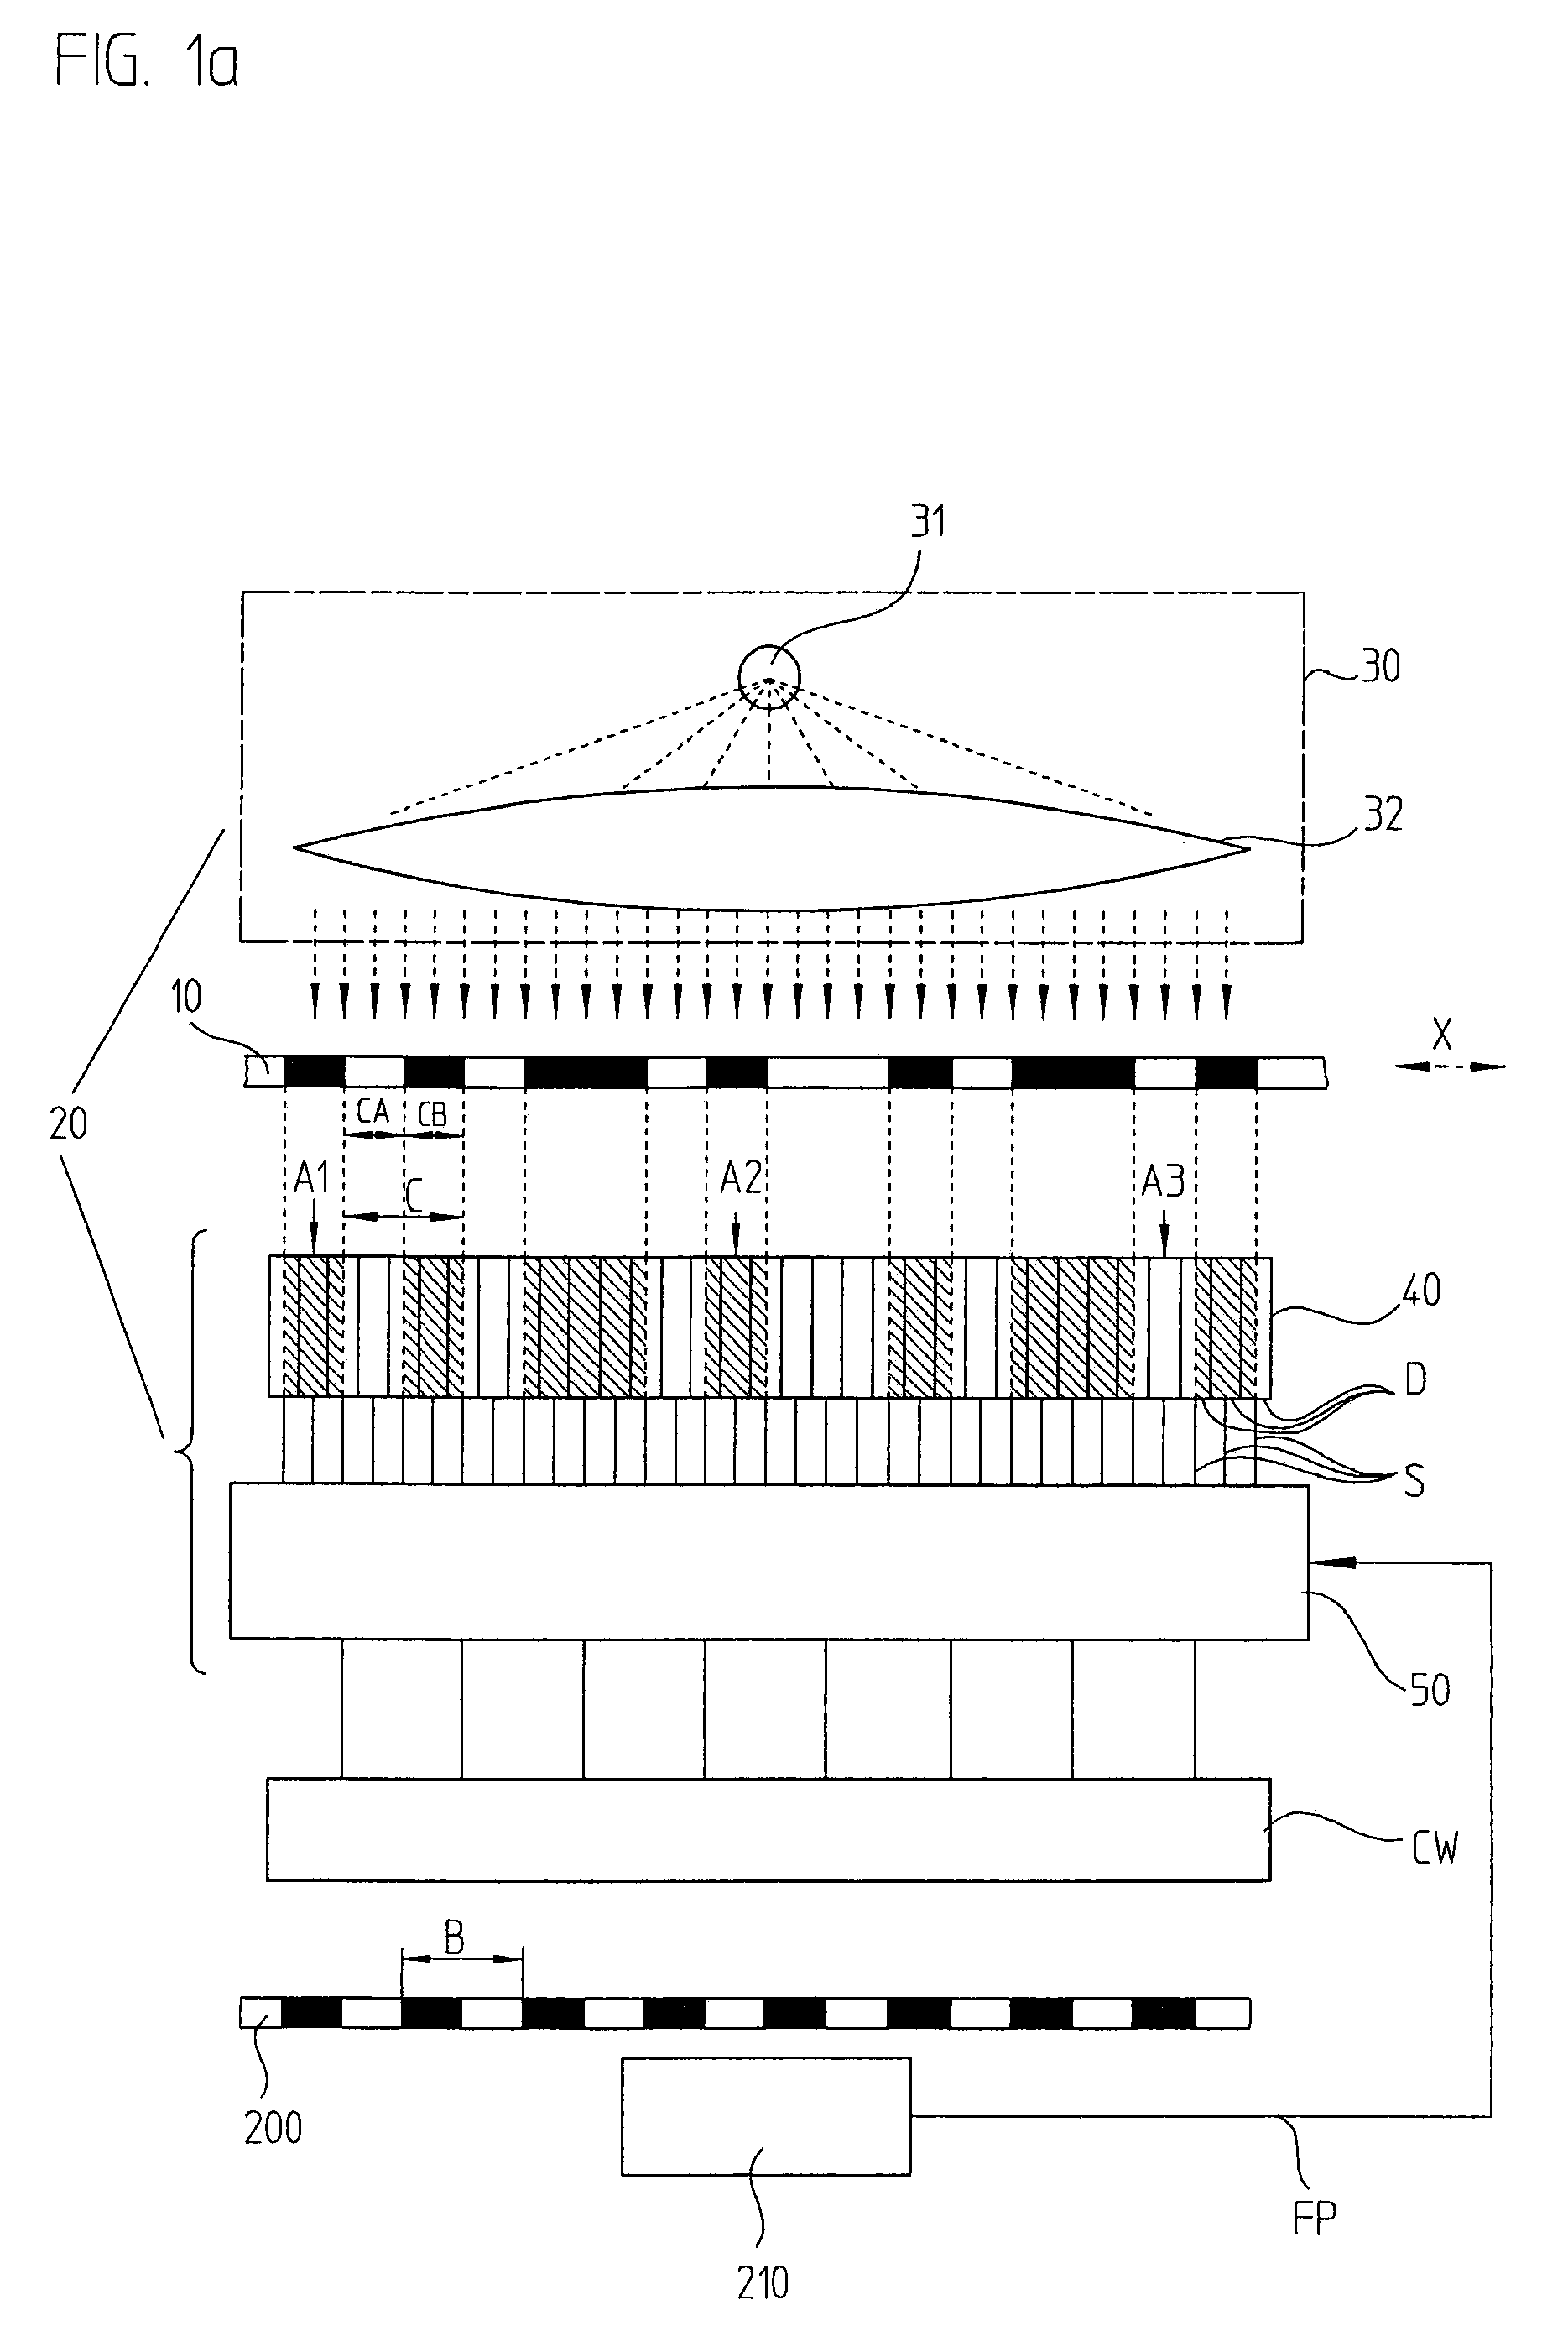 Position-measuring device and method for determining absolute position